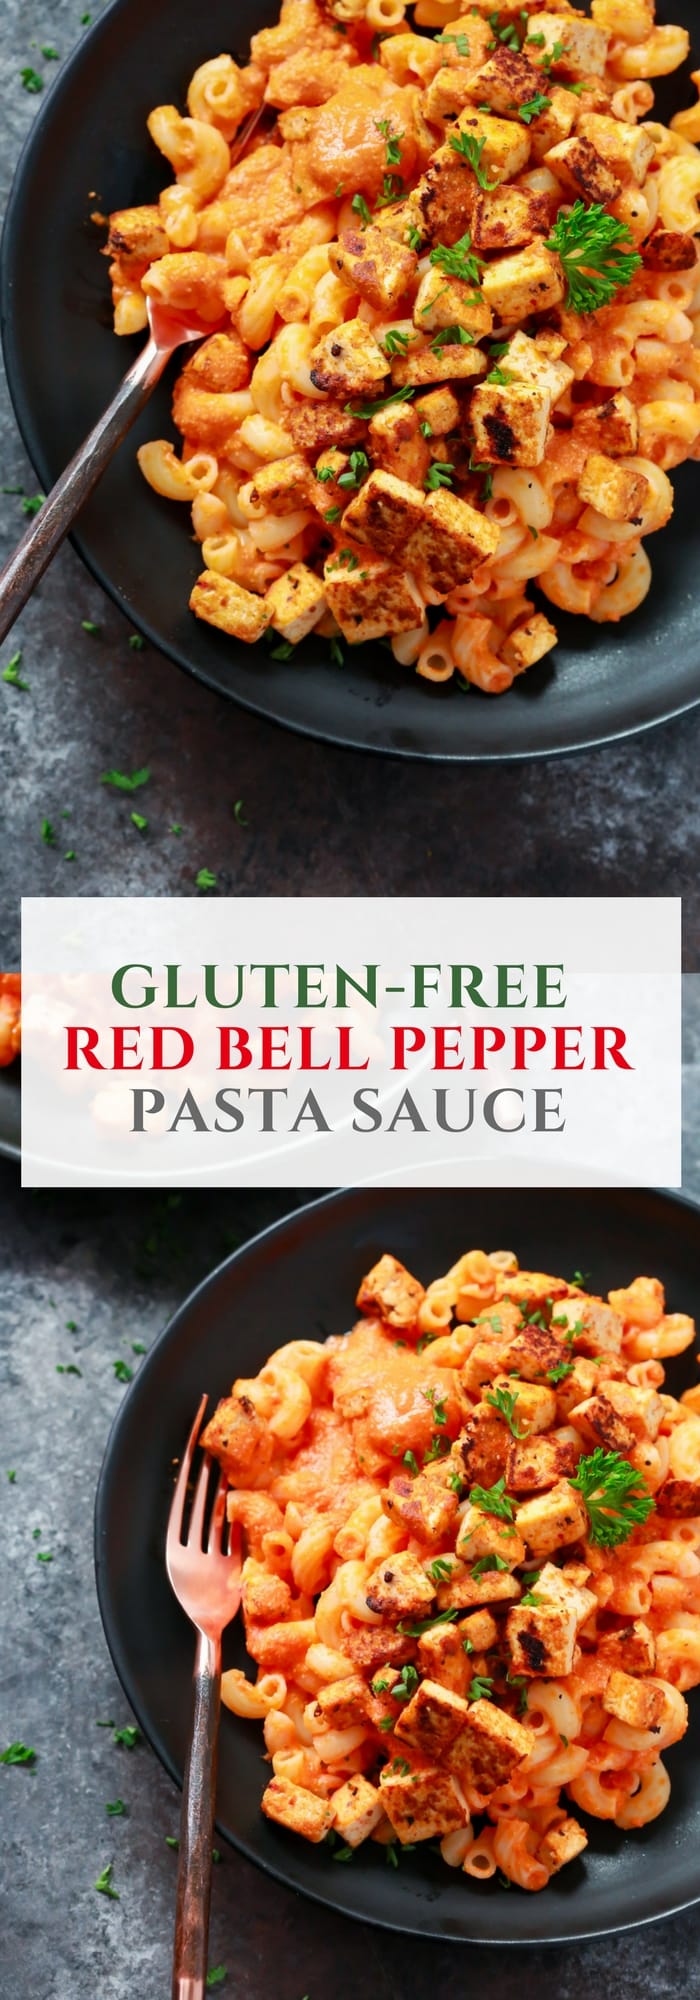 This Gluten-free Roasted Red Bell Pepper Pasta is also vegan, made with cashews, roasted red bell pepper, red onions, garlic and almond milk. And it’s topped with crispy and super flavorful tofu.